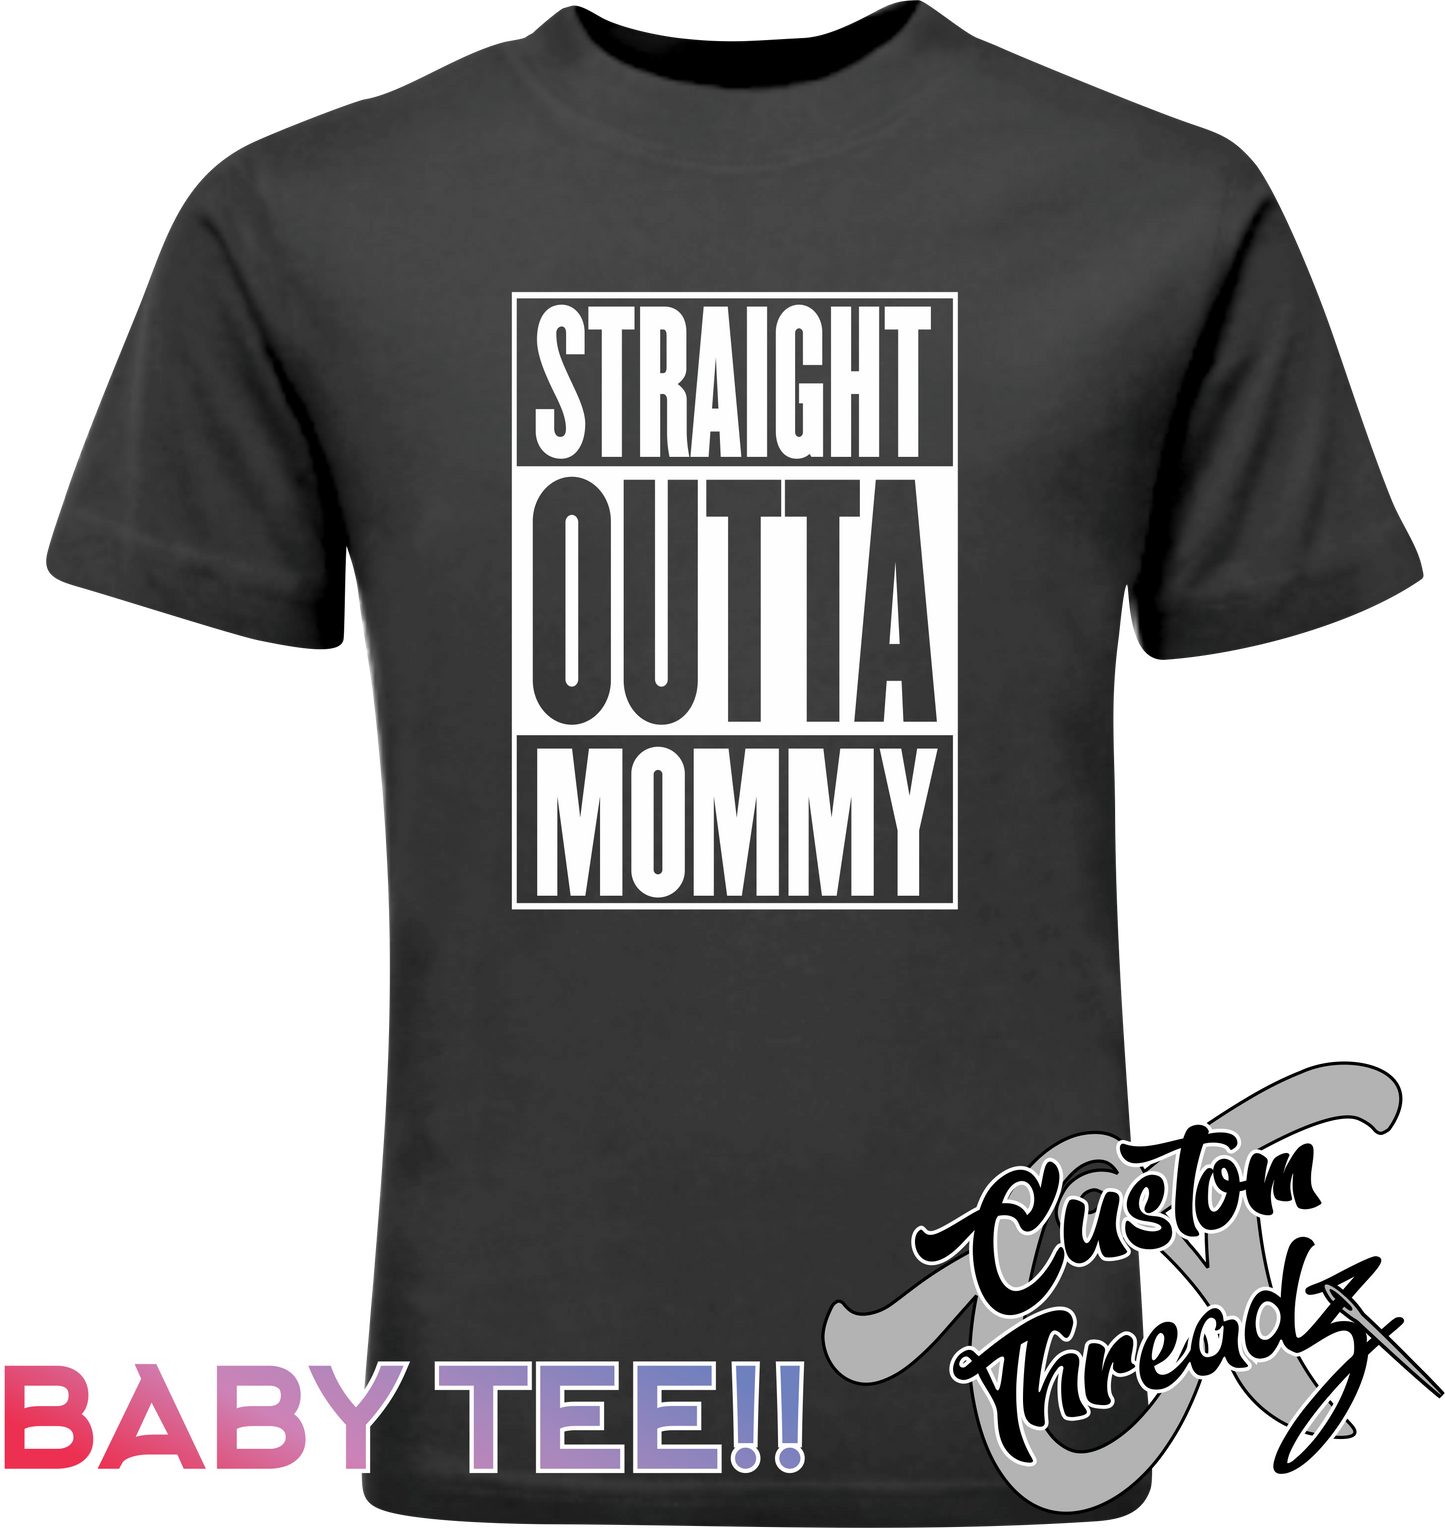 black infant tee with straight outta mommy DTG printed design